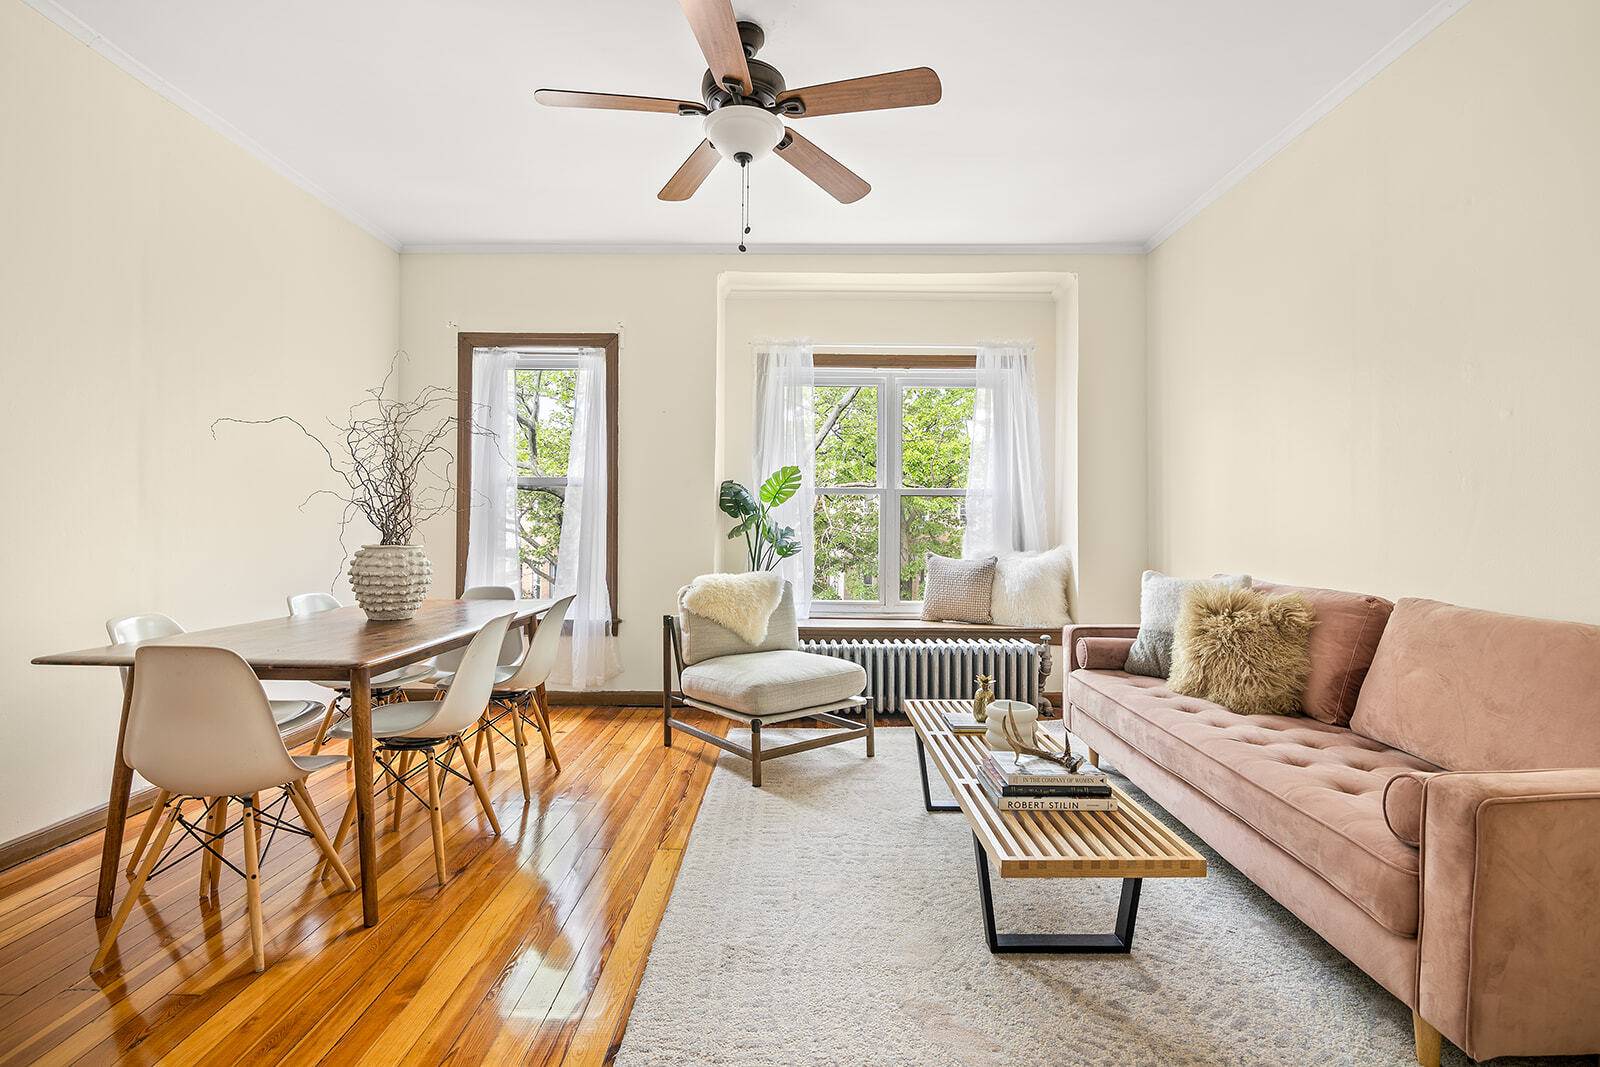 Enjoy a serene Windsor Terrace lifestyle in this early 20th century two family townhouse tucked away on a charming tree lined street.